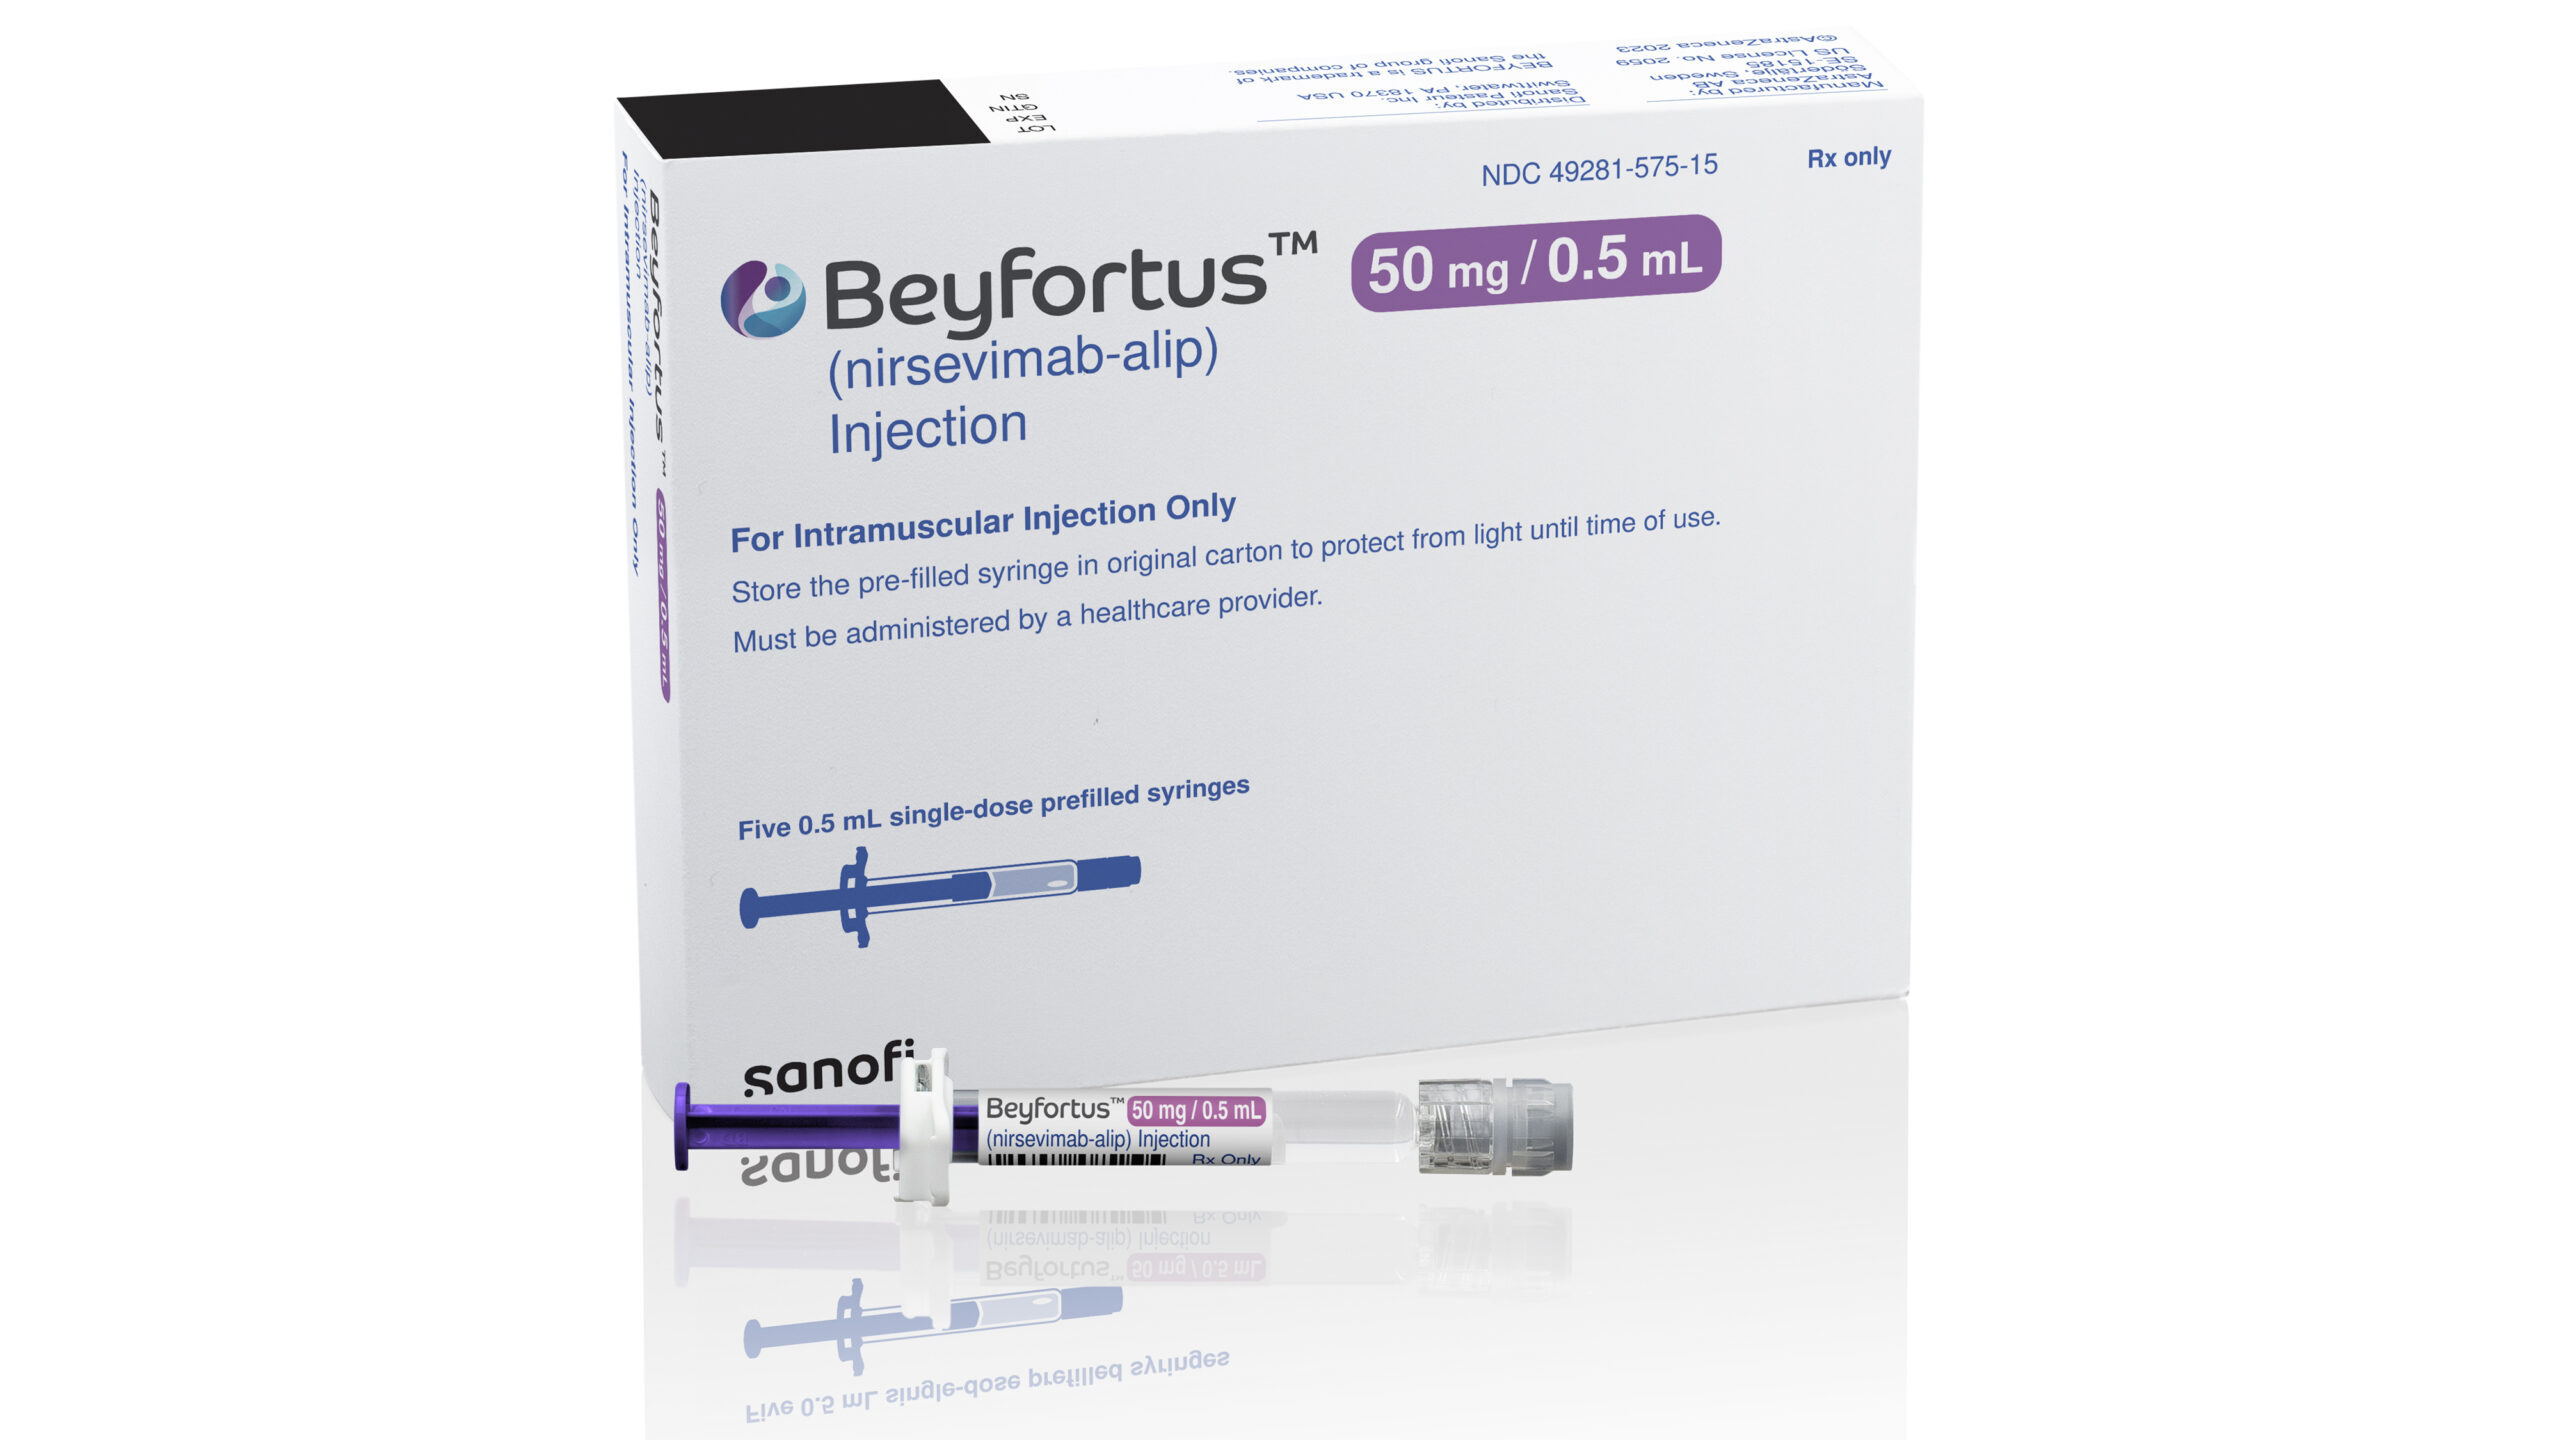 illustration provided by AstraZeneca depicts packaging for their medication Beyfortus....